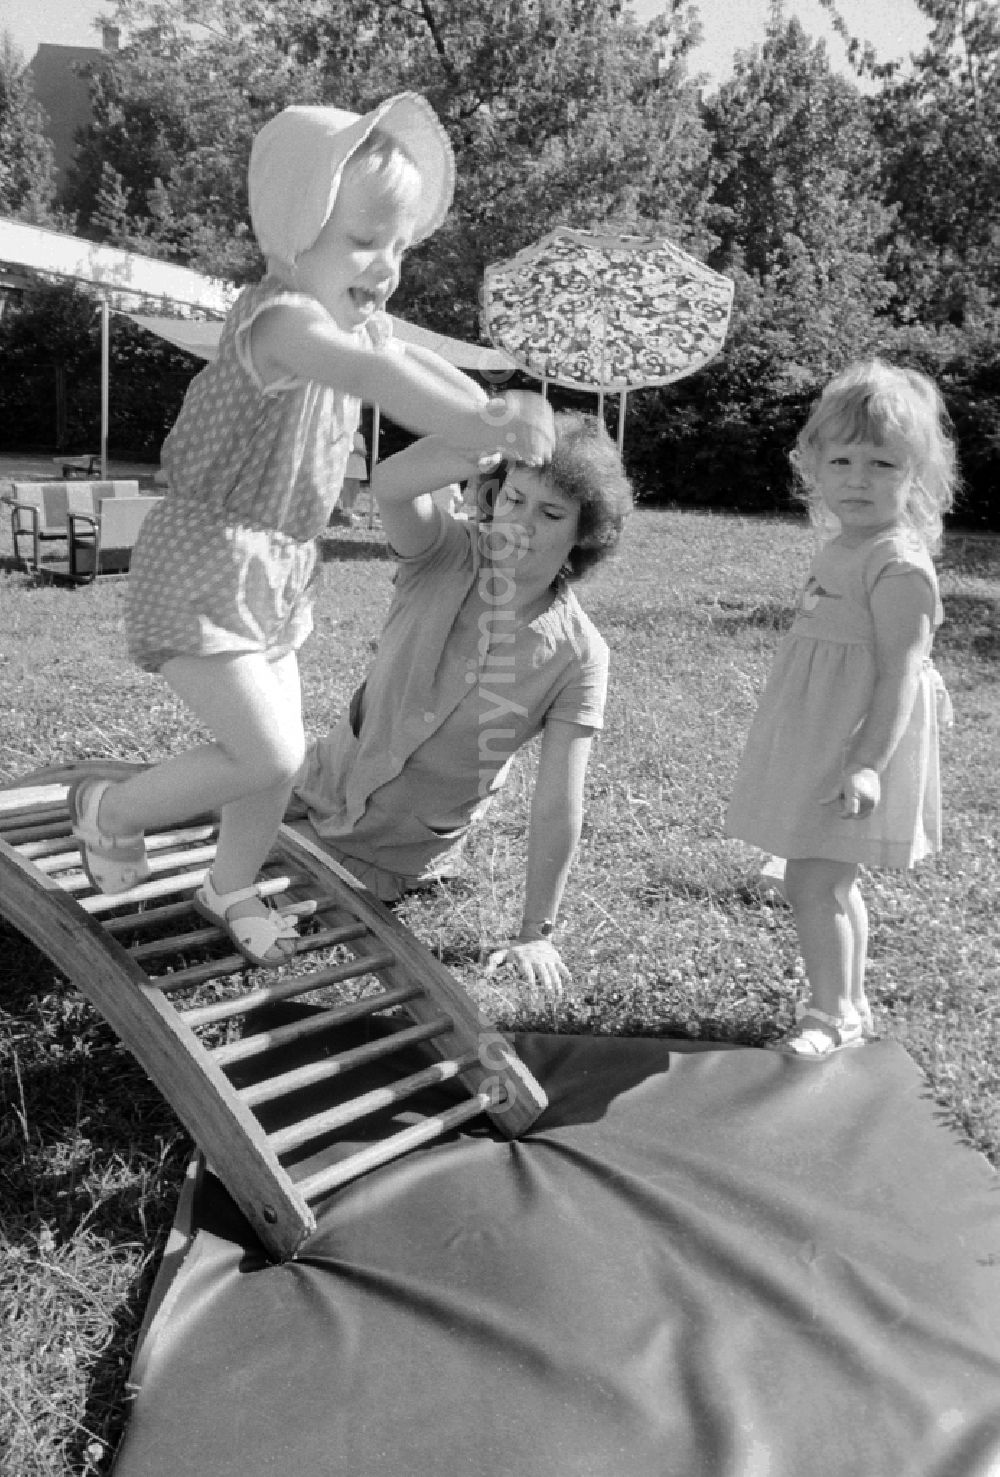 GDR photo archive: Berlin - Children play together with her educator in the garden and do gymnastics about a wooden rung curve in Berlin, the former capital of the GDR, German democratic republic